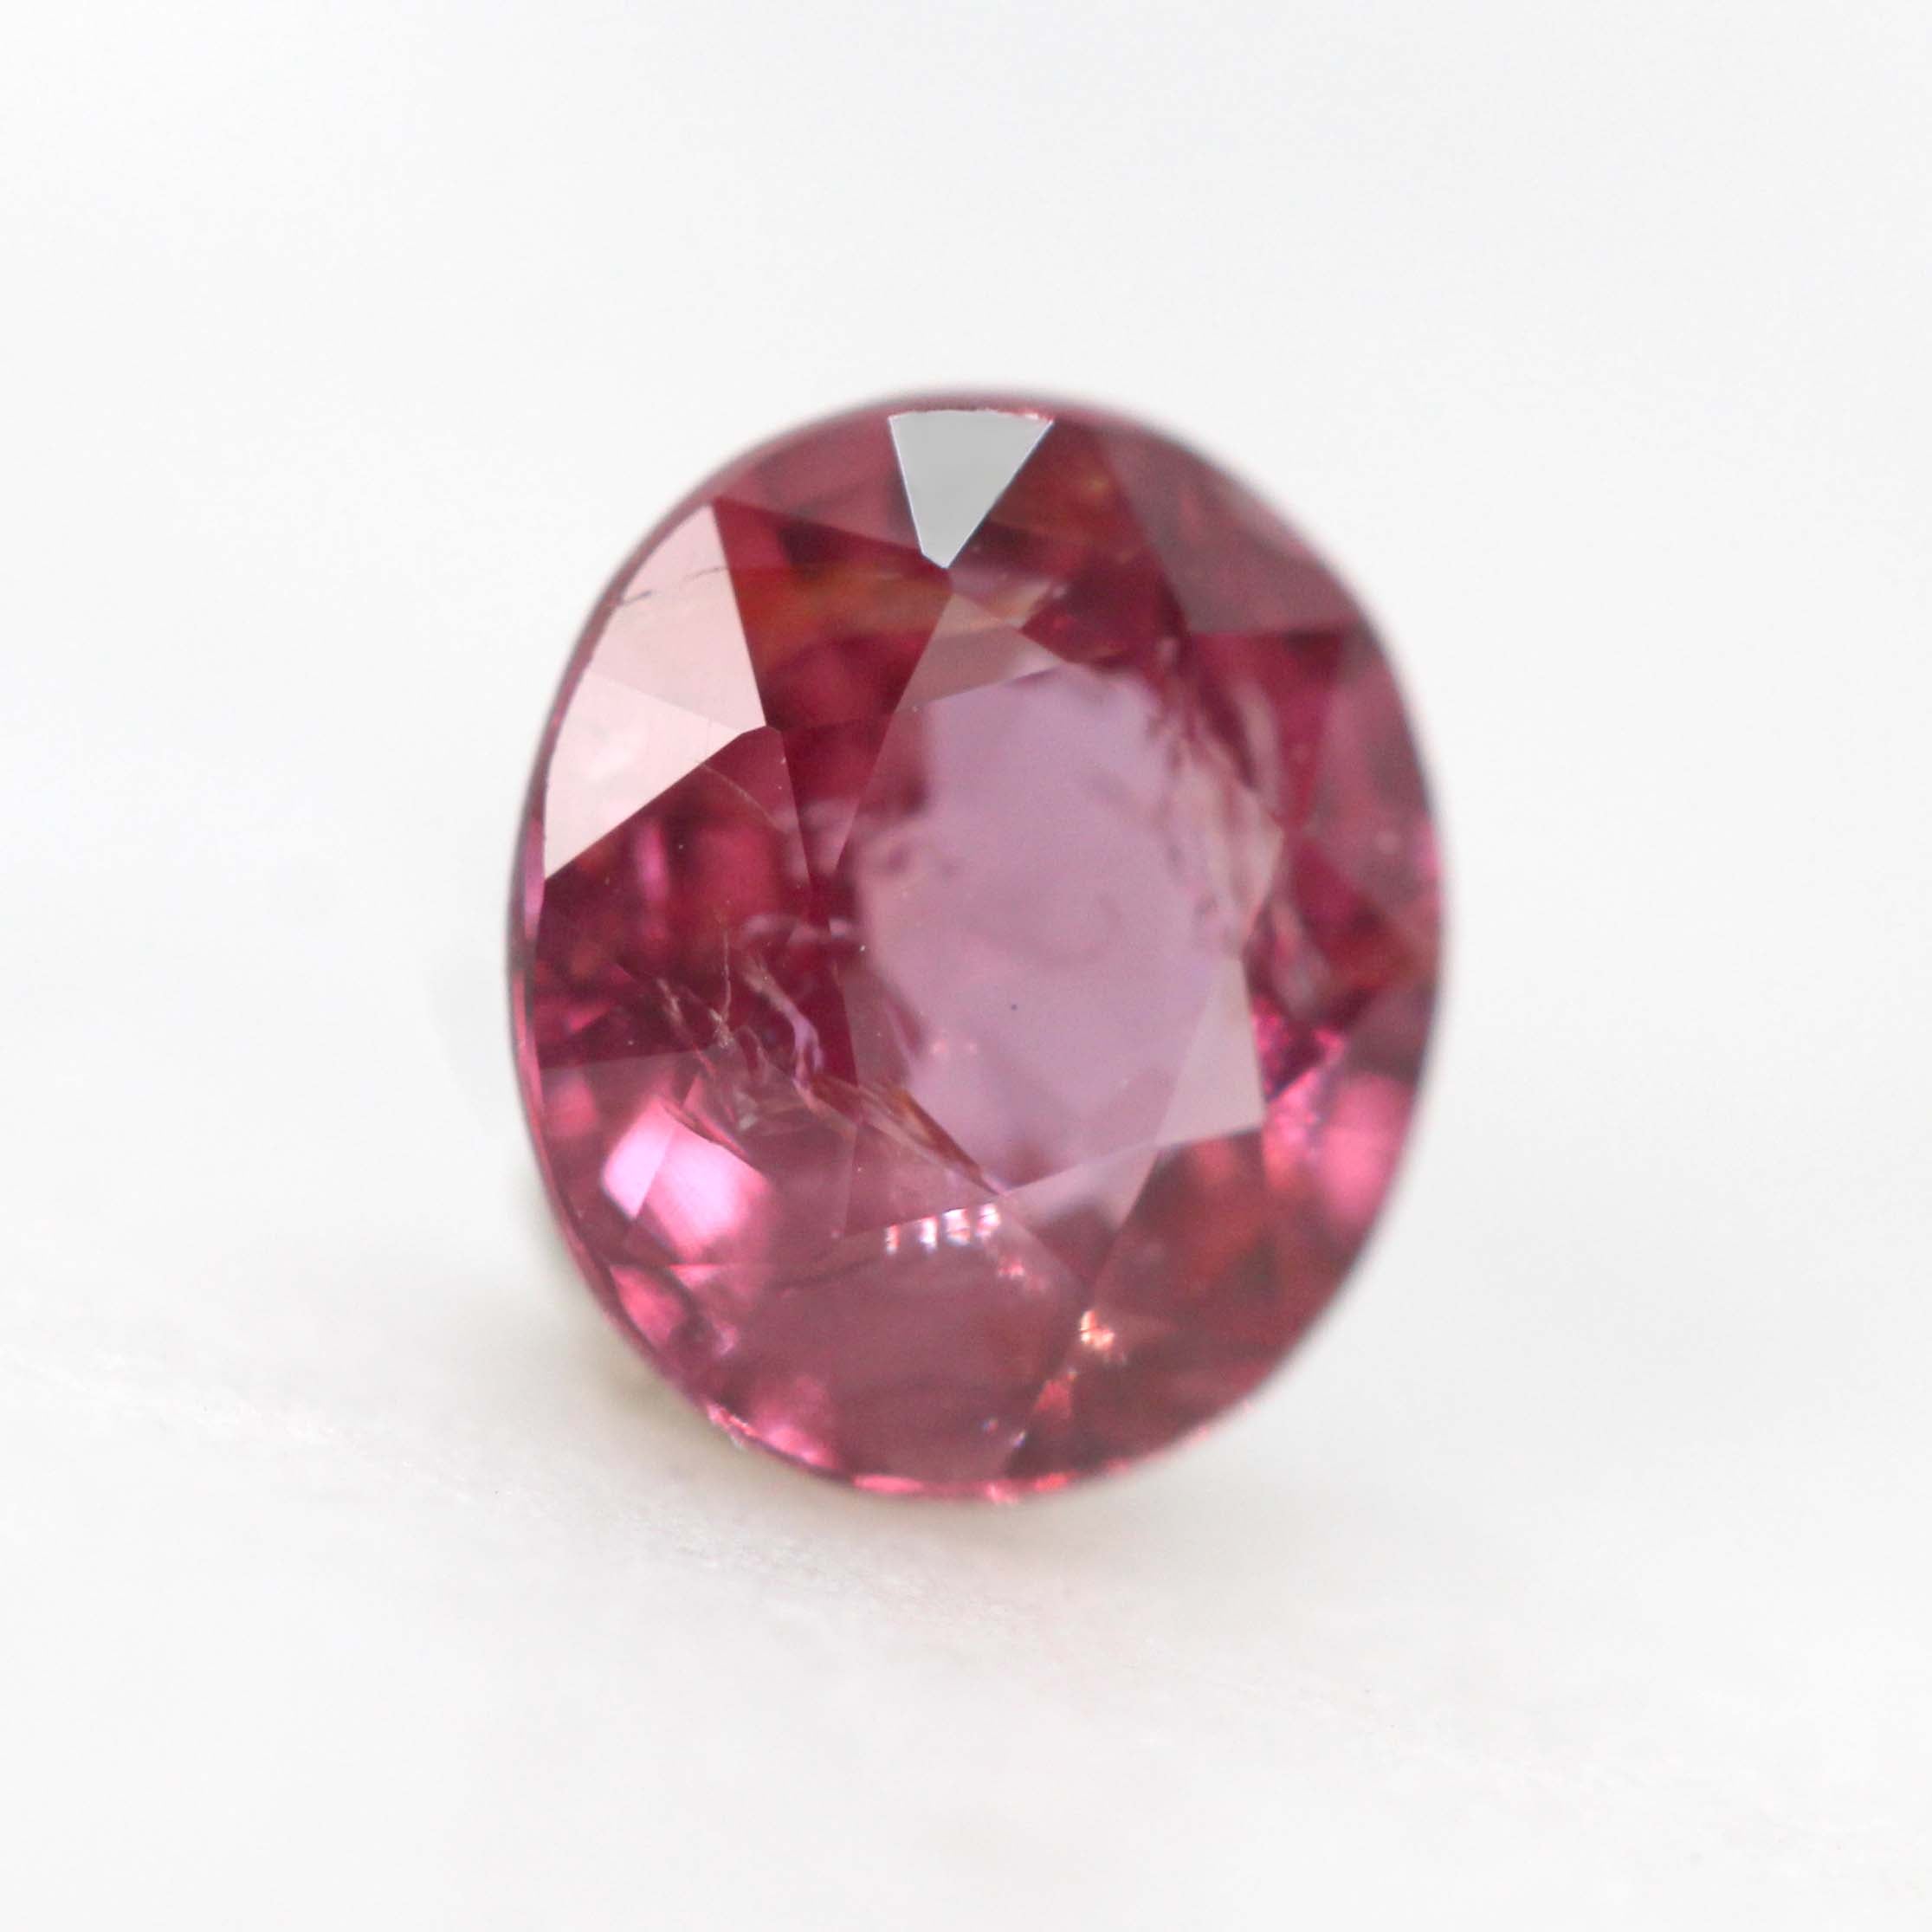 0.82 Carat Oval Red Pink Sapphire for Custom Work - Inventory Code PROS082